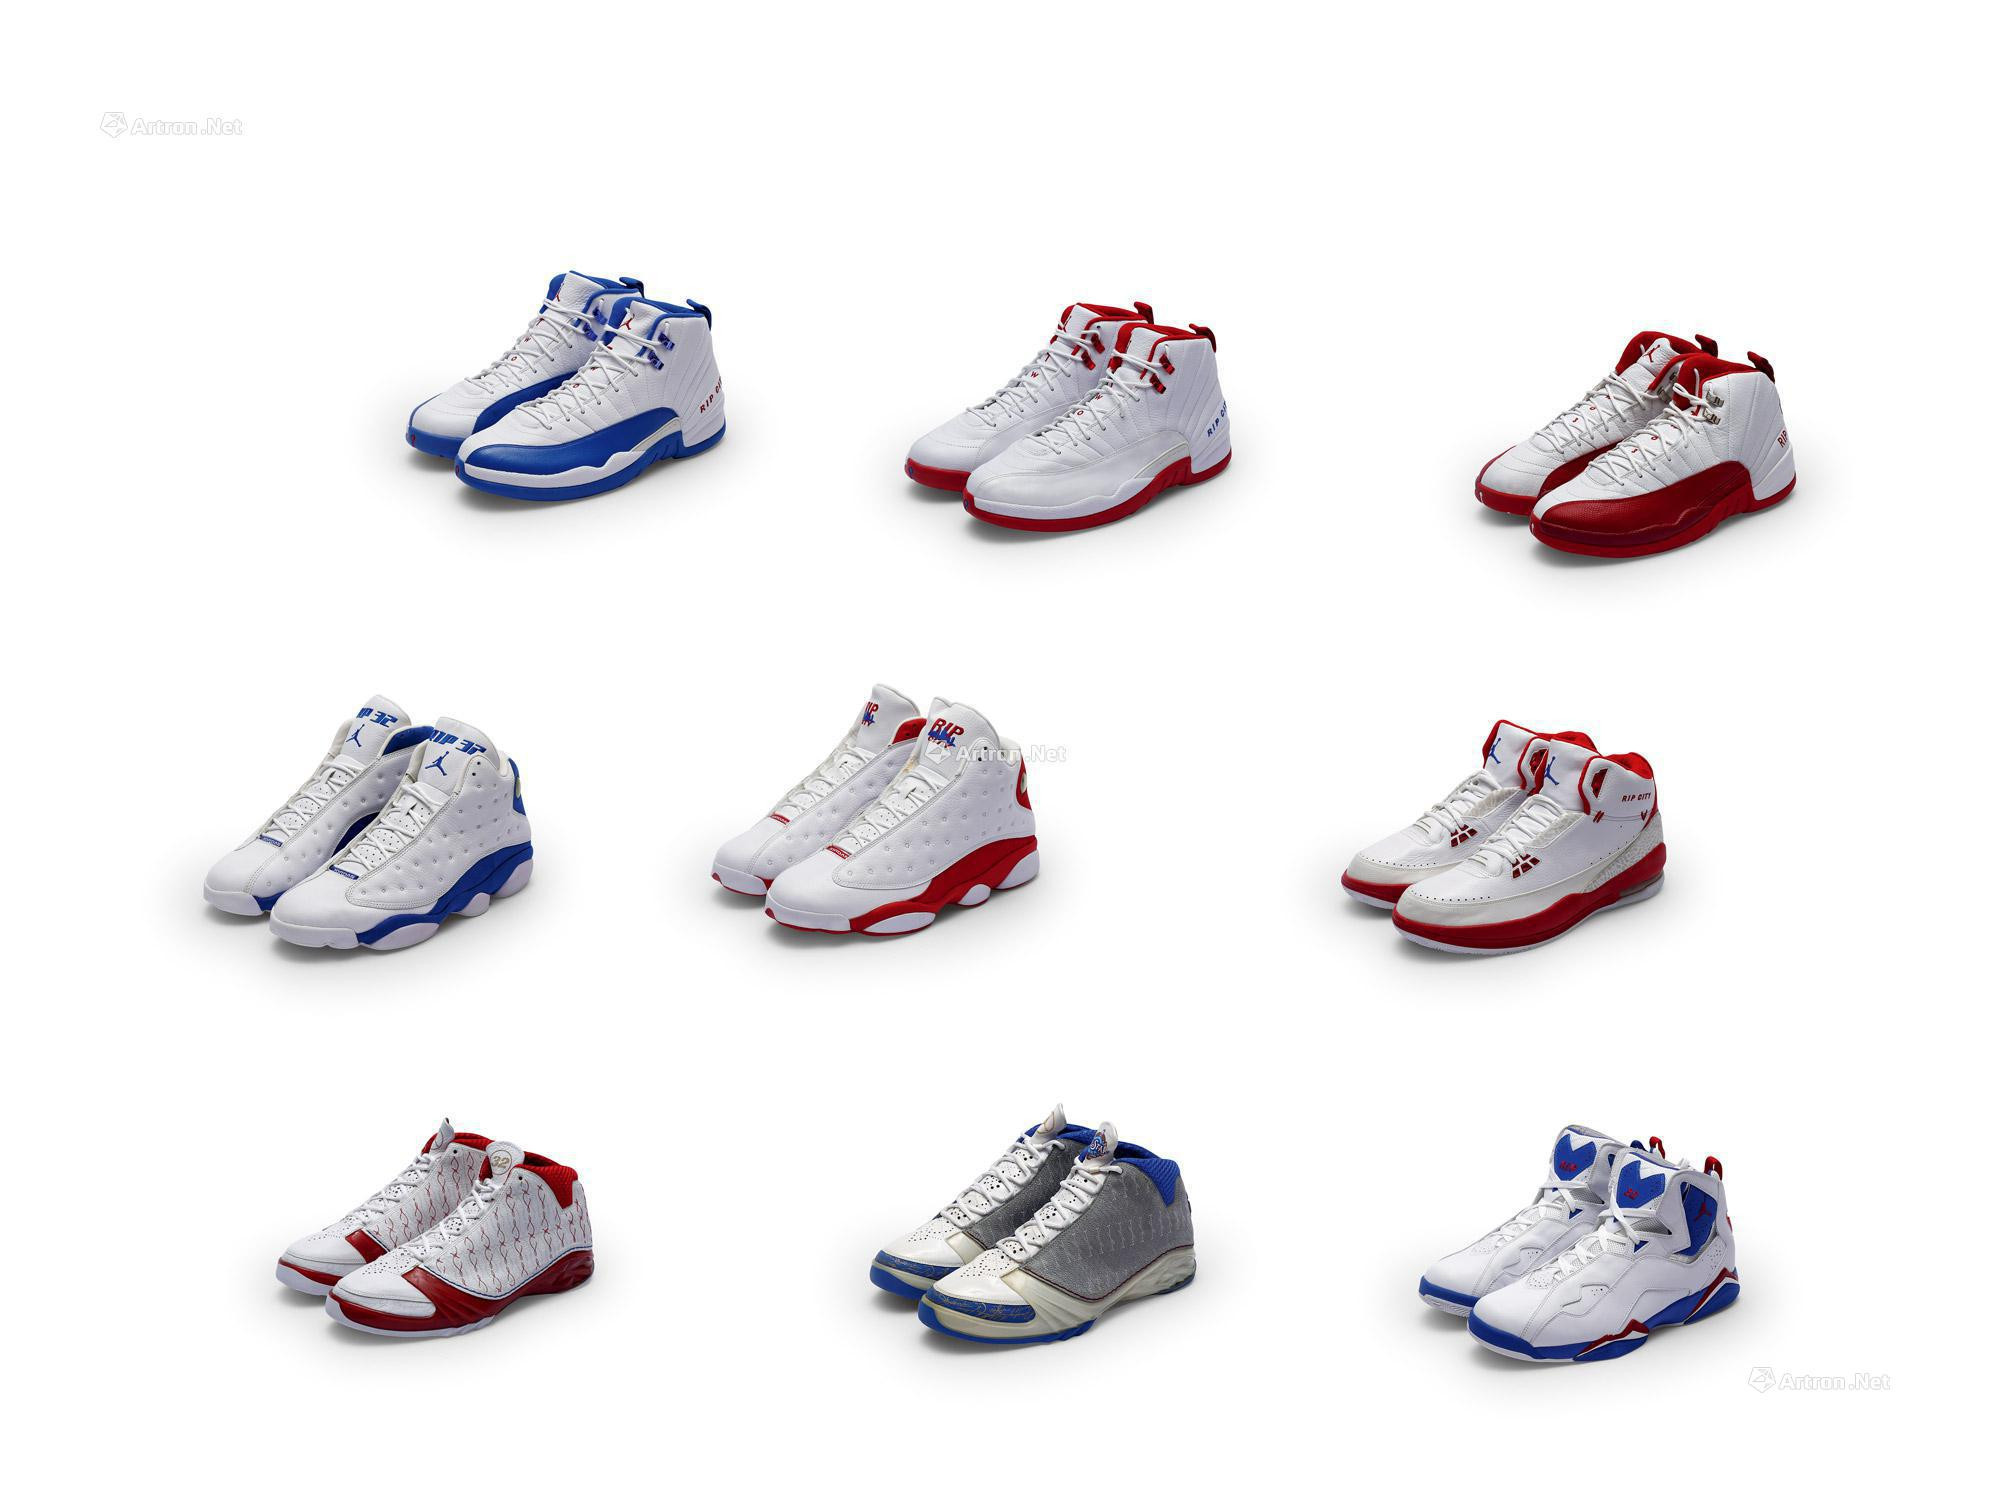 Richard Hamilton Exclusive Sneaker Collection  9 Pairs of Player Exclusive Sneakers